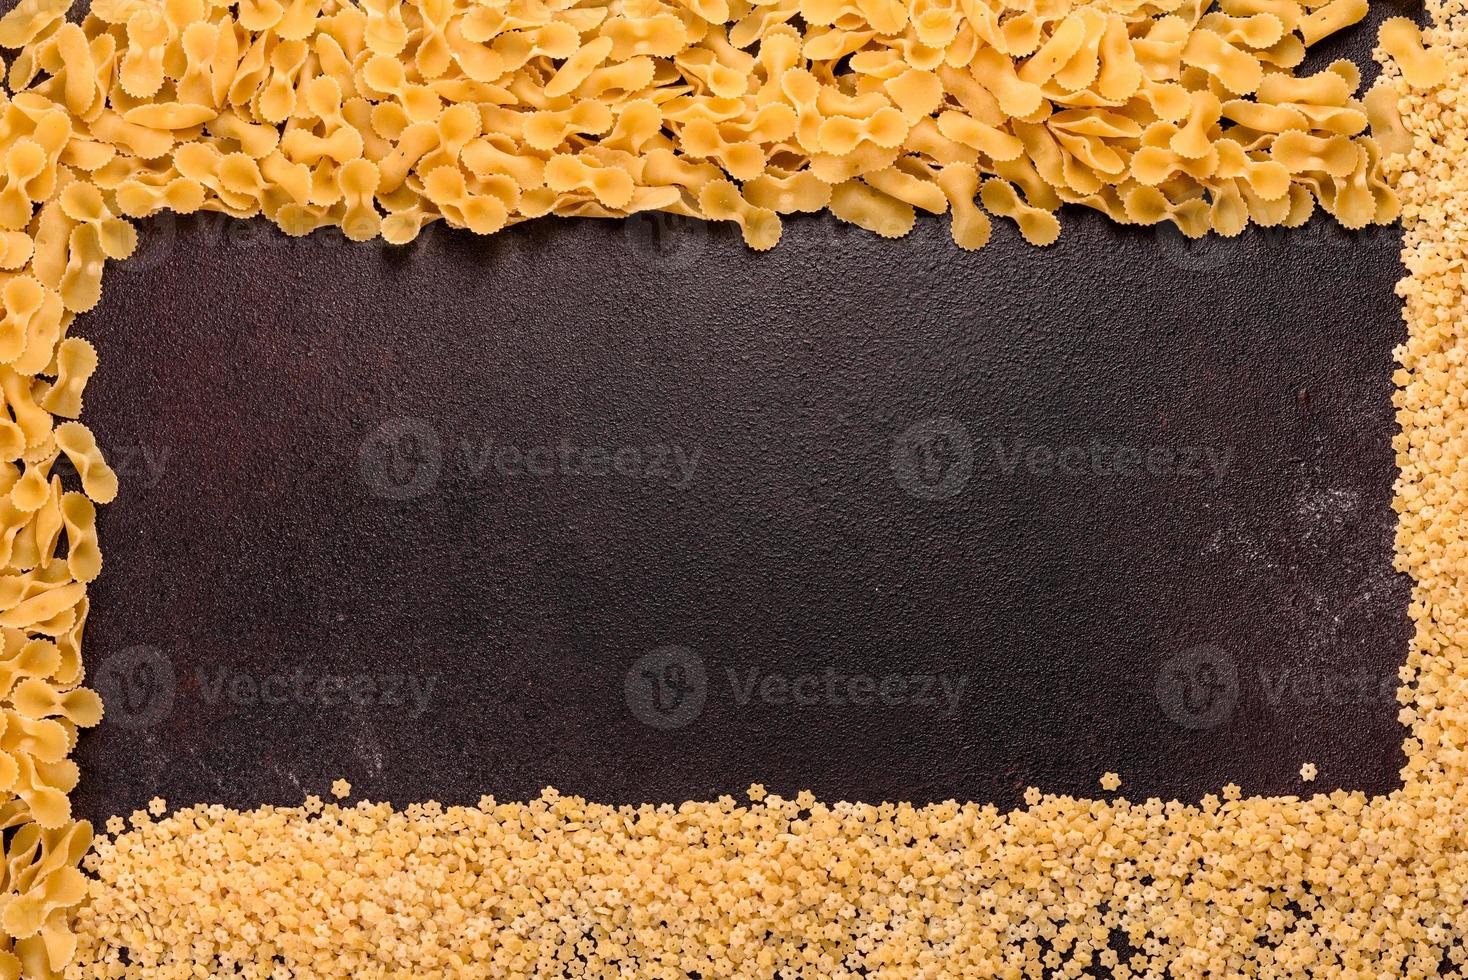 Ingredients for cooking paste on a dark background photo